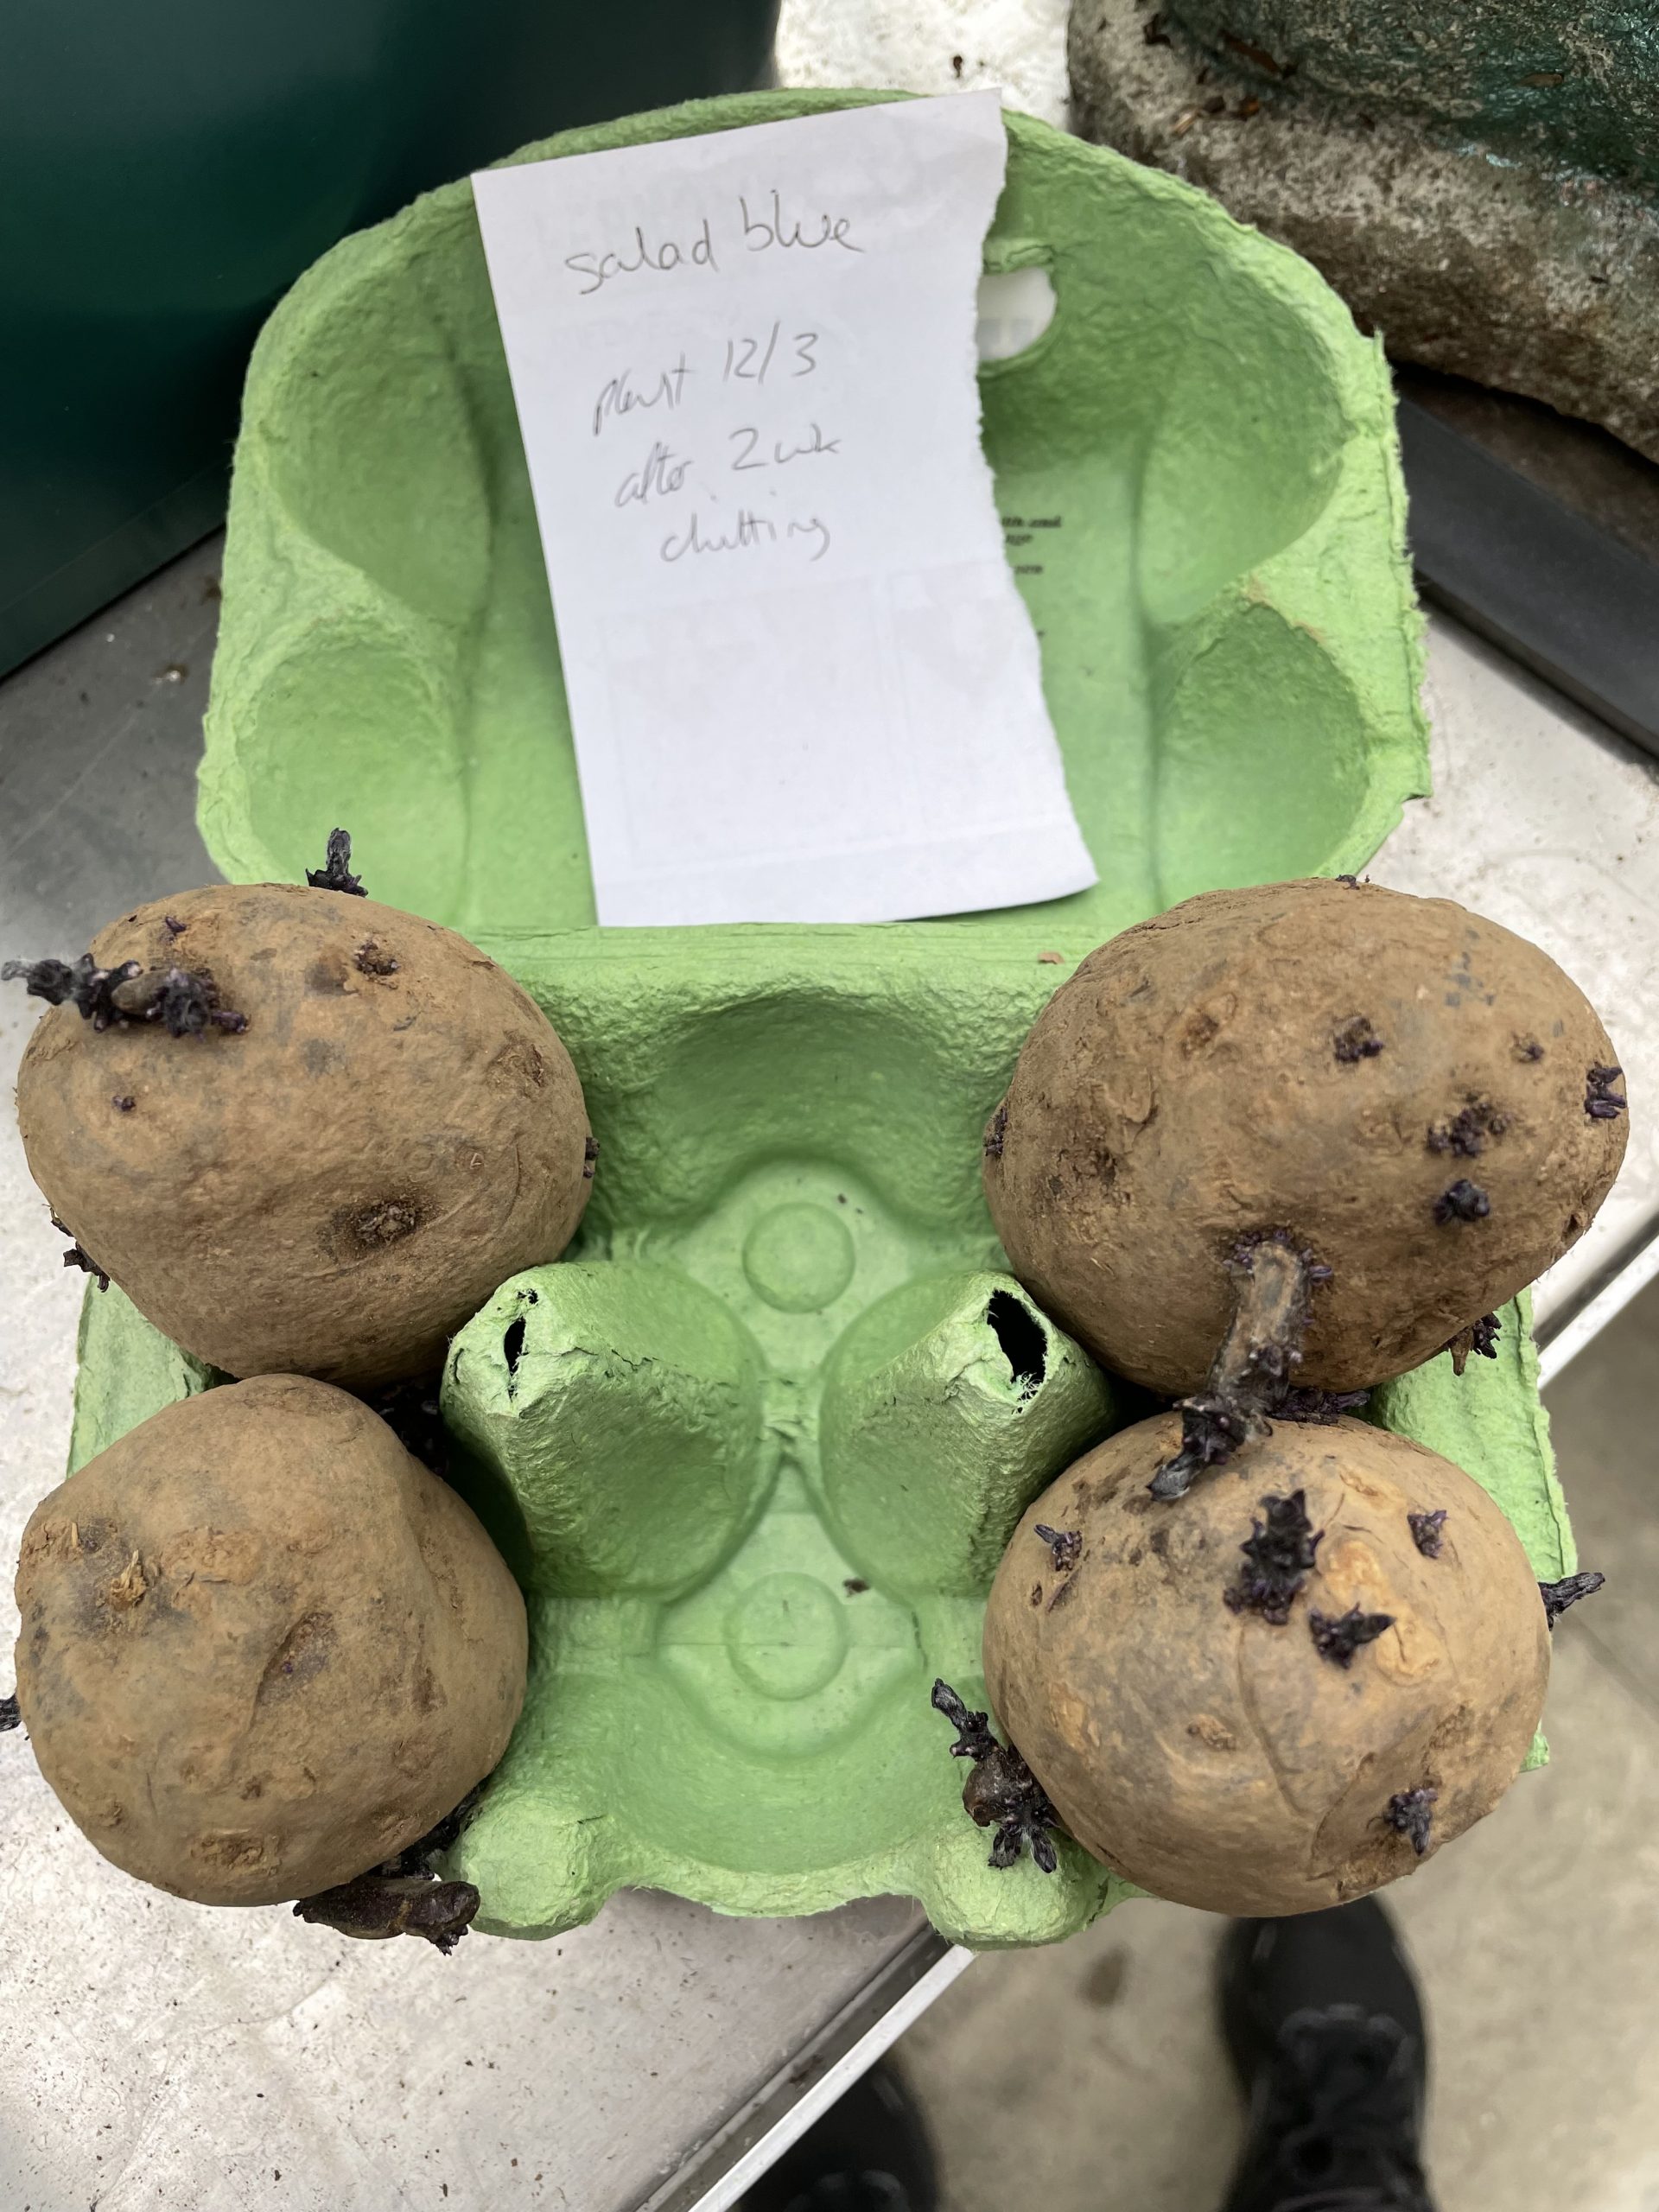 4 potatoes being chitted to start developing roots before planting  